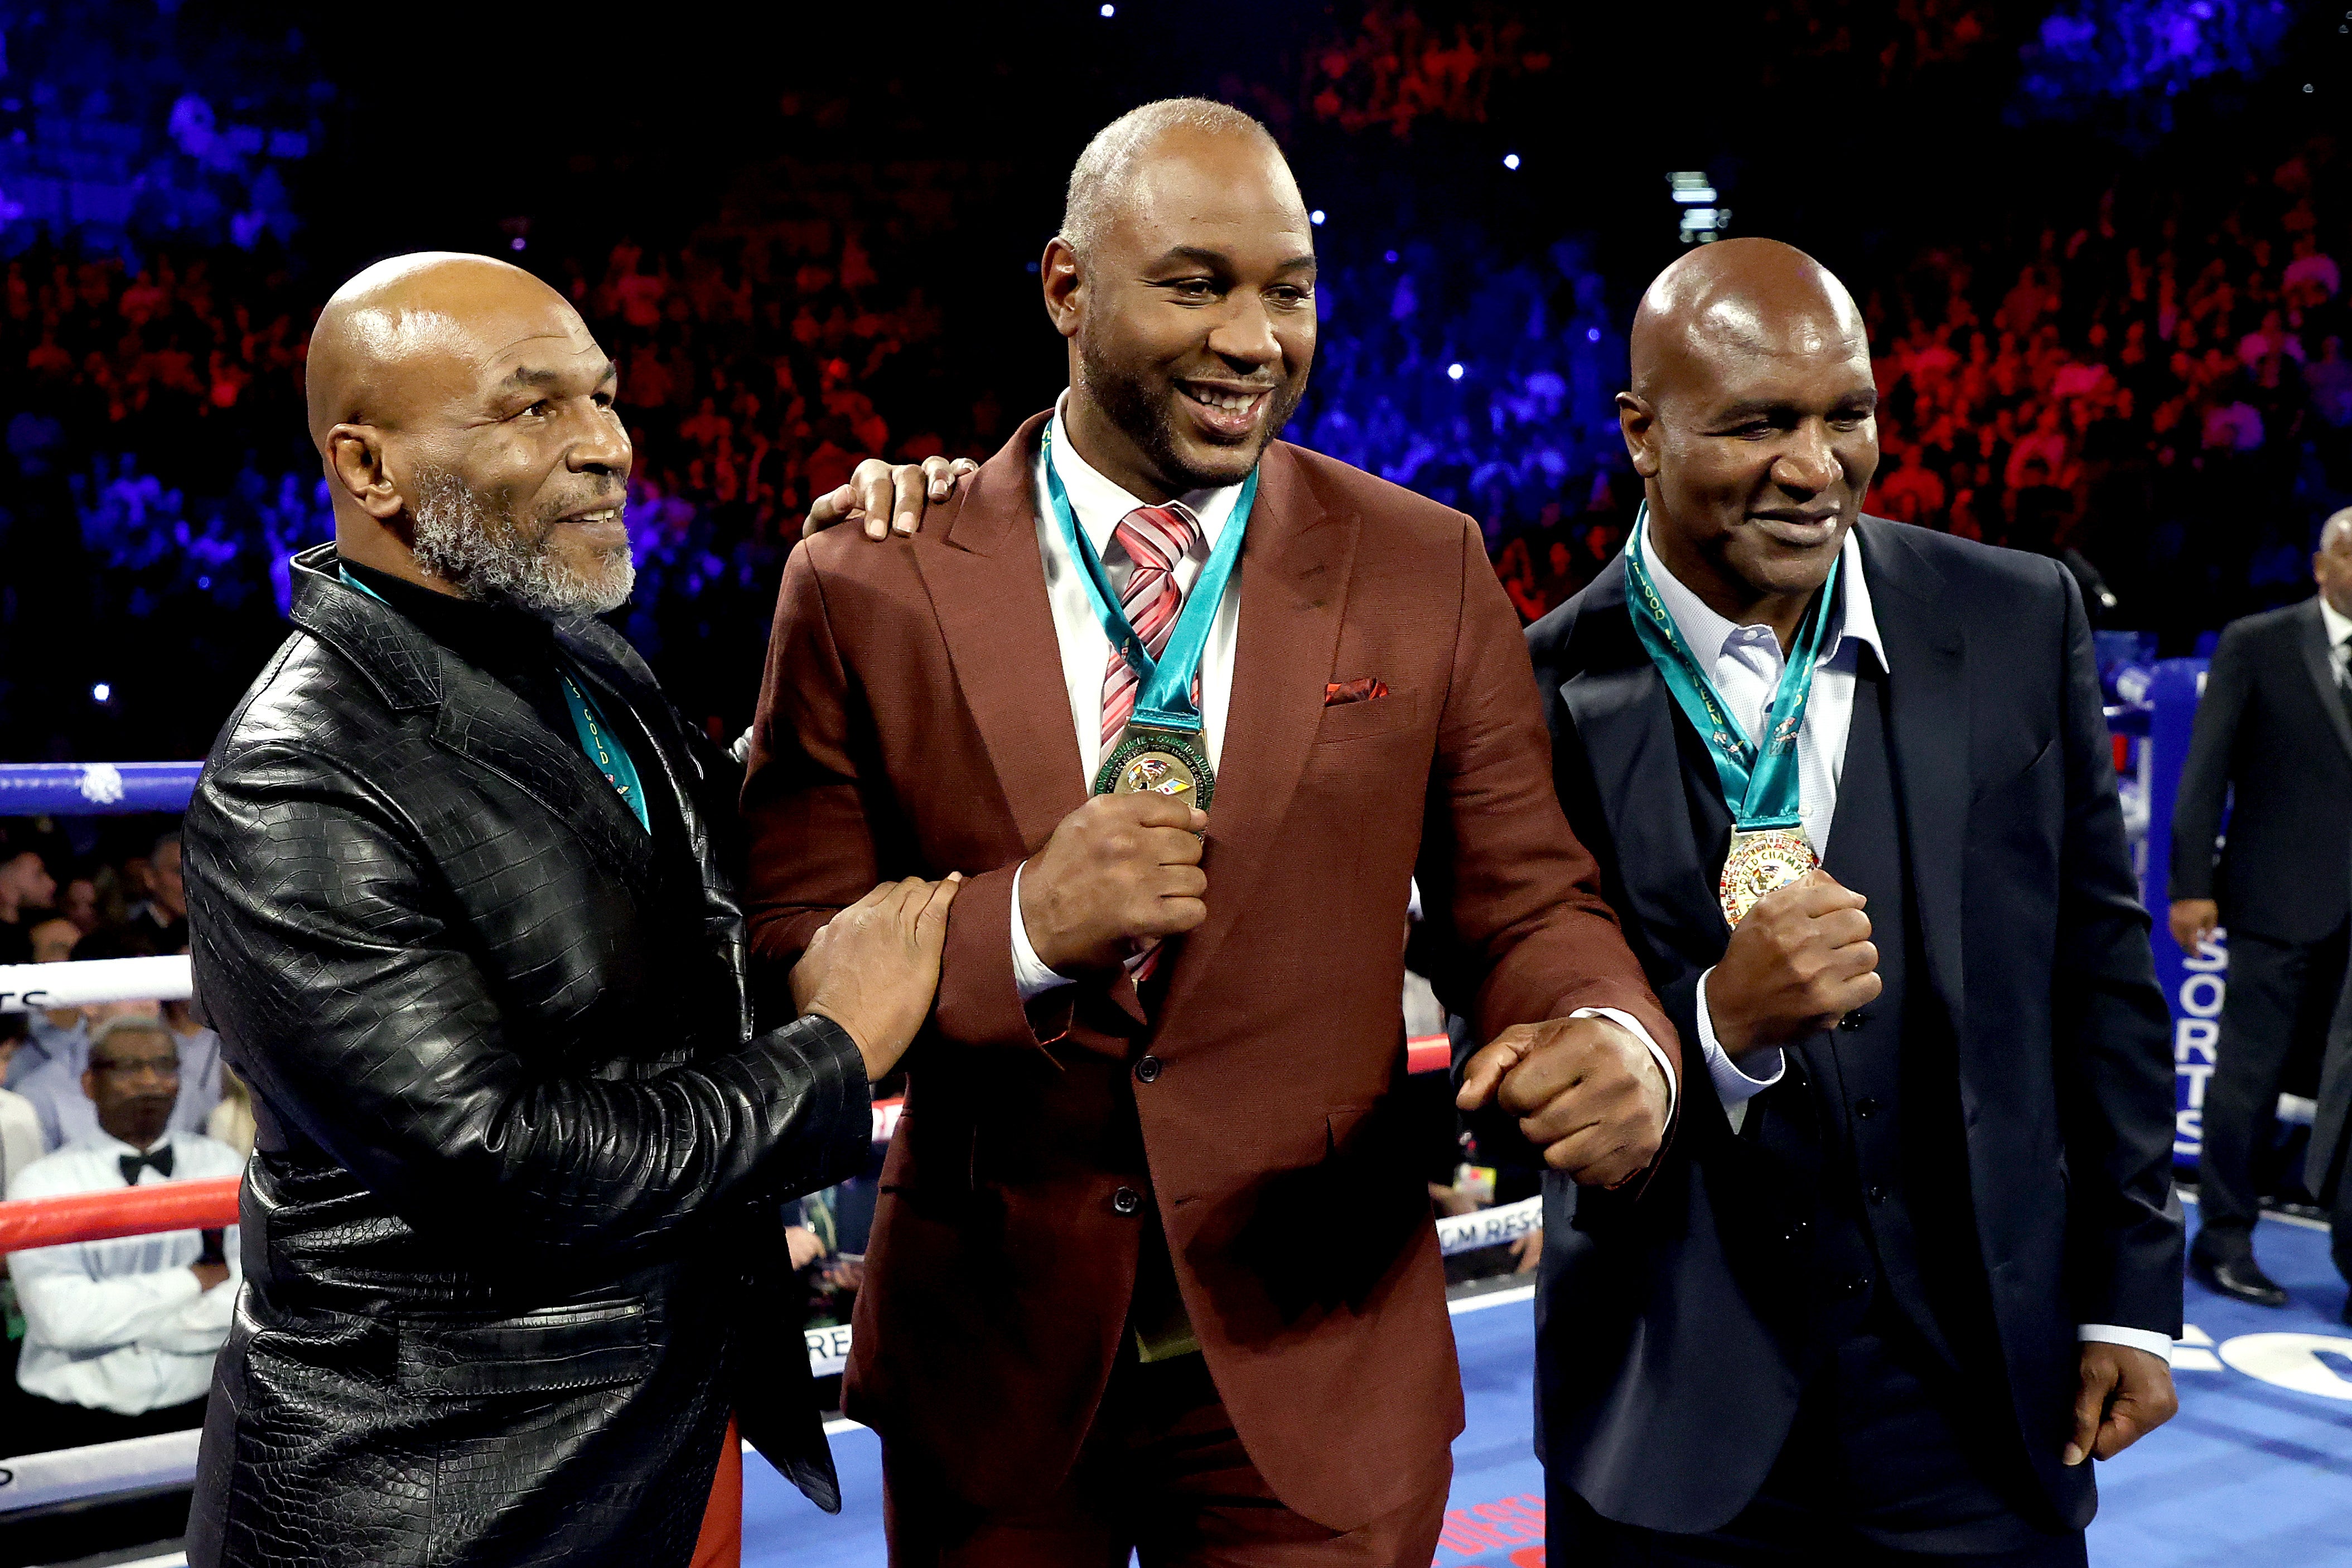 Mike Tyson with Lennox Lewis and Evander Holyfield in February 2020